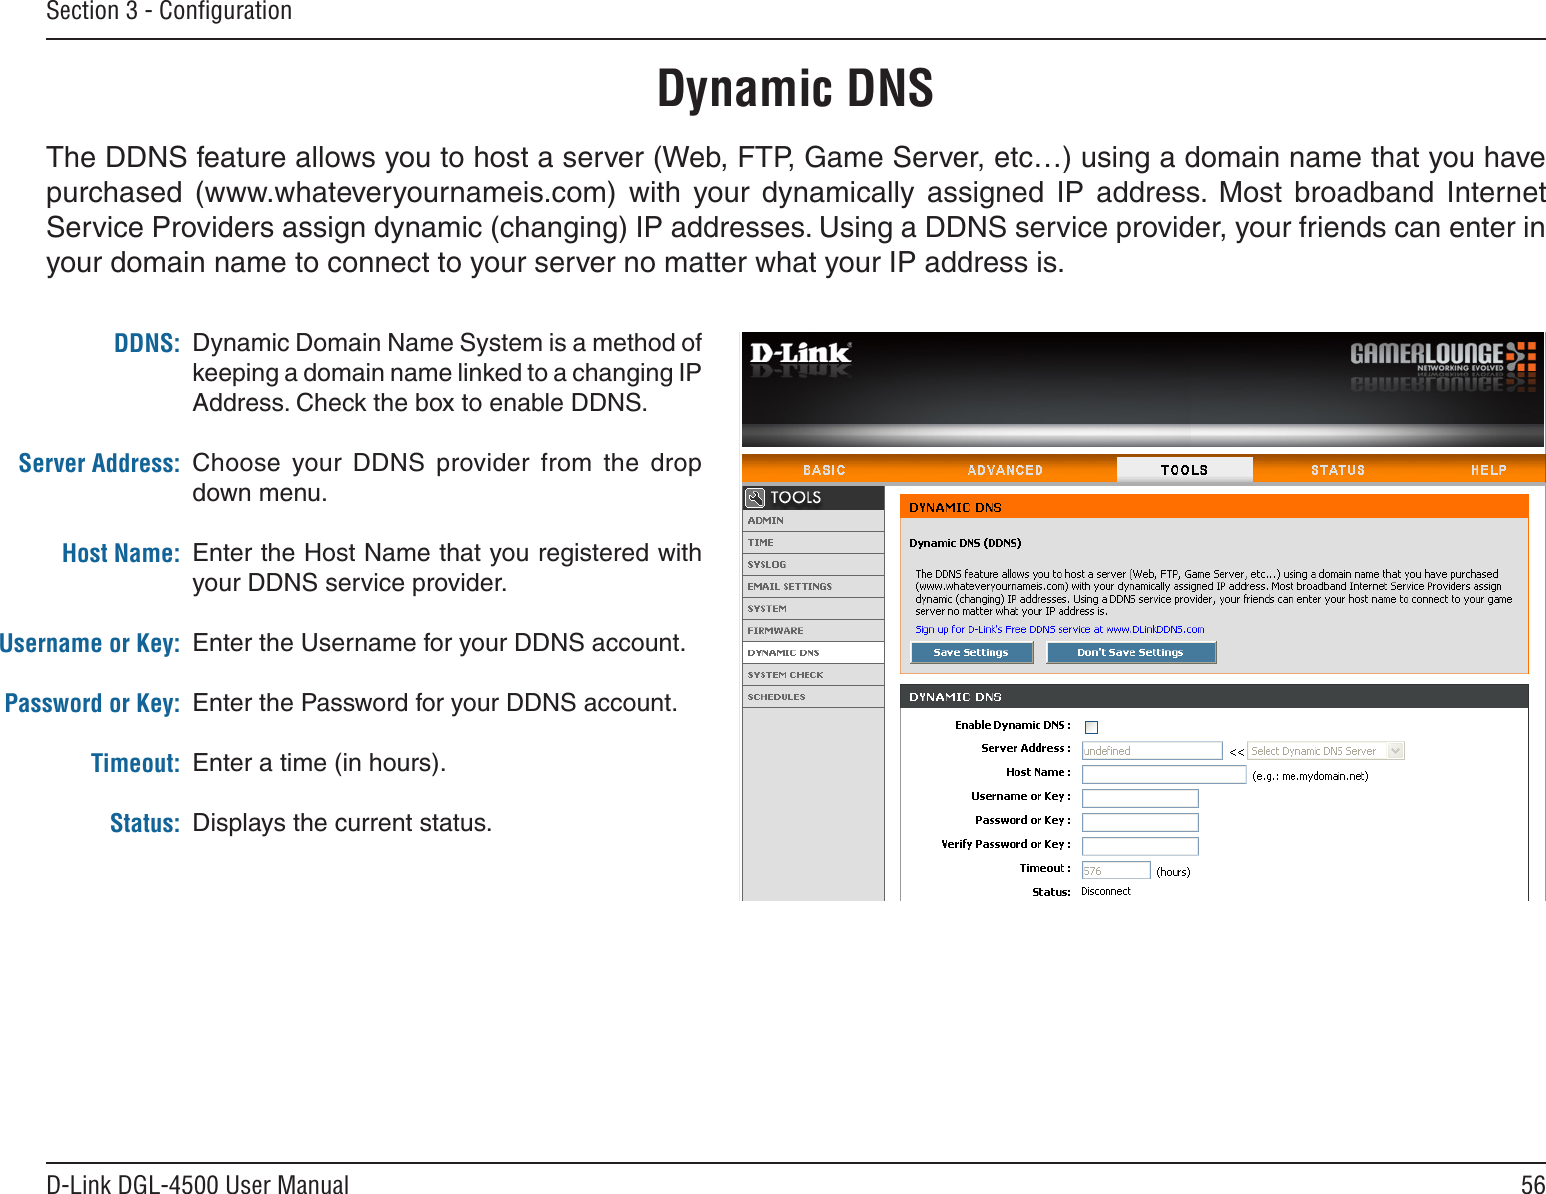 56D-Link DGL-4500 User ManualSection 3 - ConﬁgurationDynamic Domain Name System is a method of keeping a domain name linked to a changing IP Address. Check the box to enable DDNS.Choose  your  DDNS  provider  from  the  drop down menu.Enter the Host Name that you registered with your DDNS service provider.Enter the Username for your DDNS account.Enter the Password for your DDNS account.Enter a time (in hours).Displays the current status.DDNS:Server Address:Host Name:Username or Key:Password or Key:Timeout:Status:Dynamic DNSThe DDNS feature allows you to host a server (Web, FTP, Game Server, etc…) using a domain name that you have purchased  (www.whateveryournameis.com)  with  your  dynamically  assigned  IP  address.  Most  broadband  Internet Service Providers assign dynamic (changing) IP addresses. Using a DDNS service provider, your friends can enter in your domain name to connect to your server no matter what your IP address is.